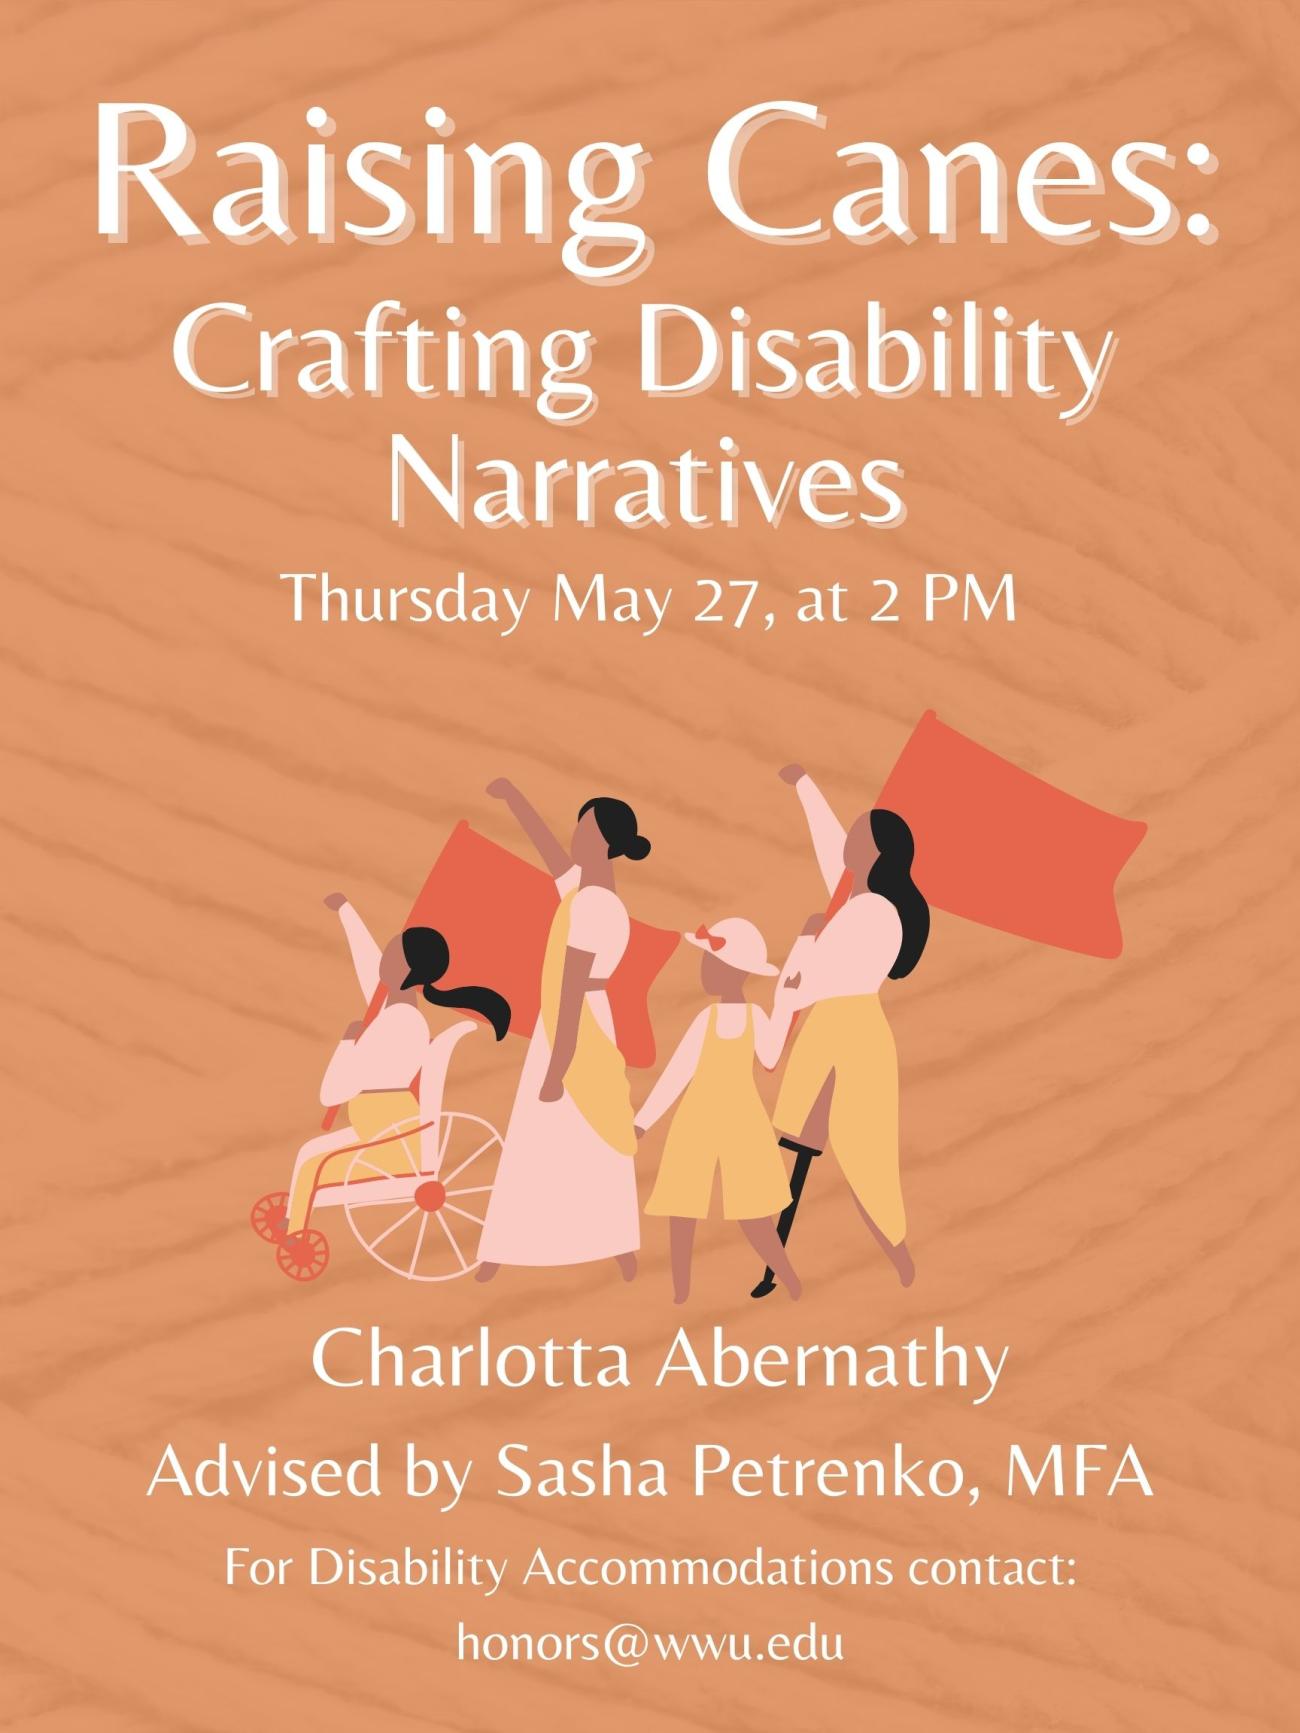 The poster reads “Raising Canes: Crafting Disability Narratives. Thursday May 27th, at 2 PM.” at the top, with clip art of disabled protesters marching in the center, and text at the bottom that reads “Charlotta Abernathy, advised by Sasha Petrenko, MFA. For Disability Accommodations contact: honors@wwu.edu.” The poster has Dark orange background showing a weaving yarn pattern.